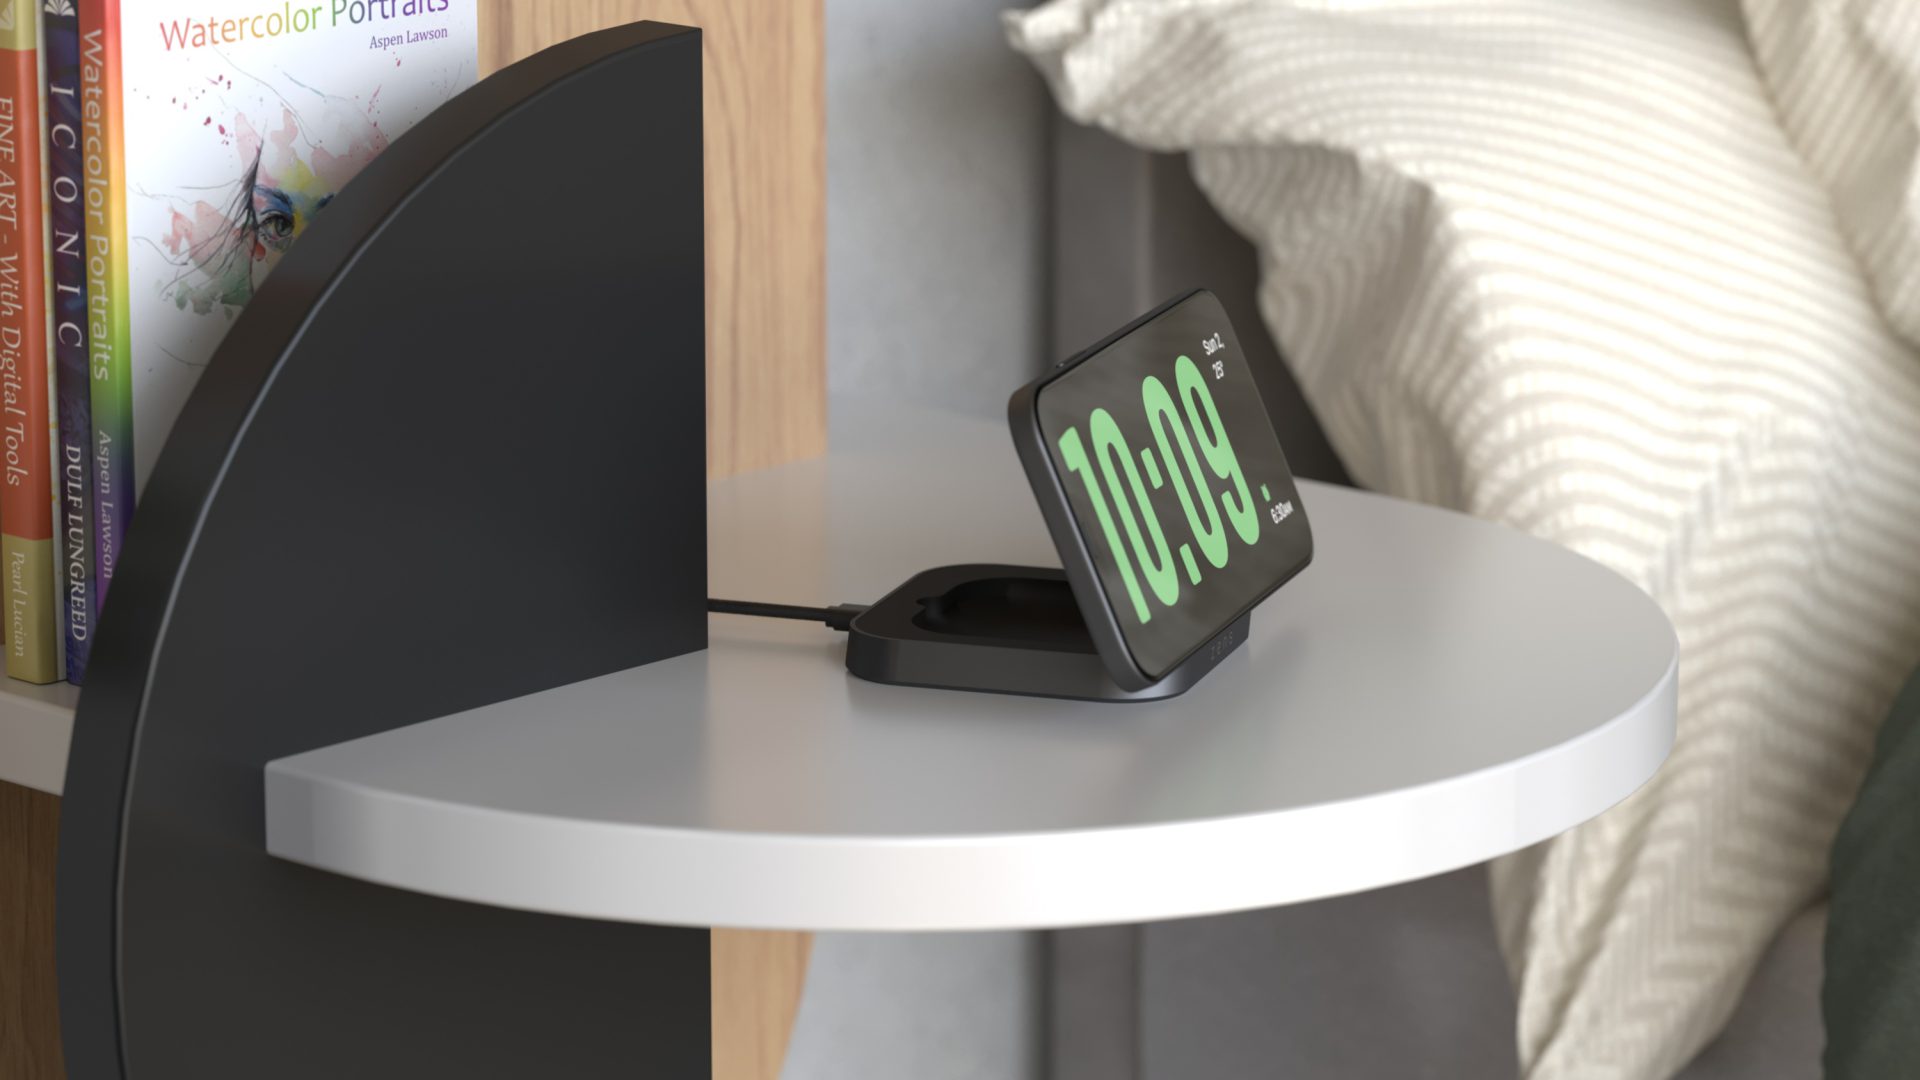 Zens Magnetic Nightstand Charger